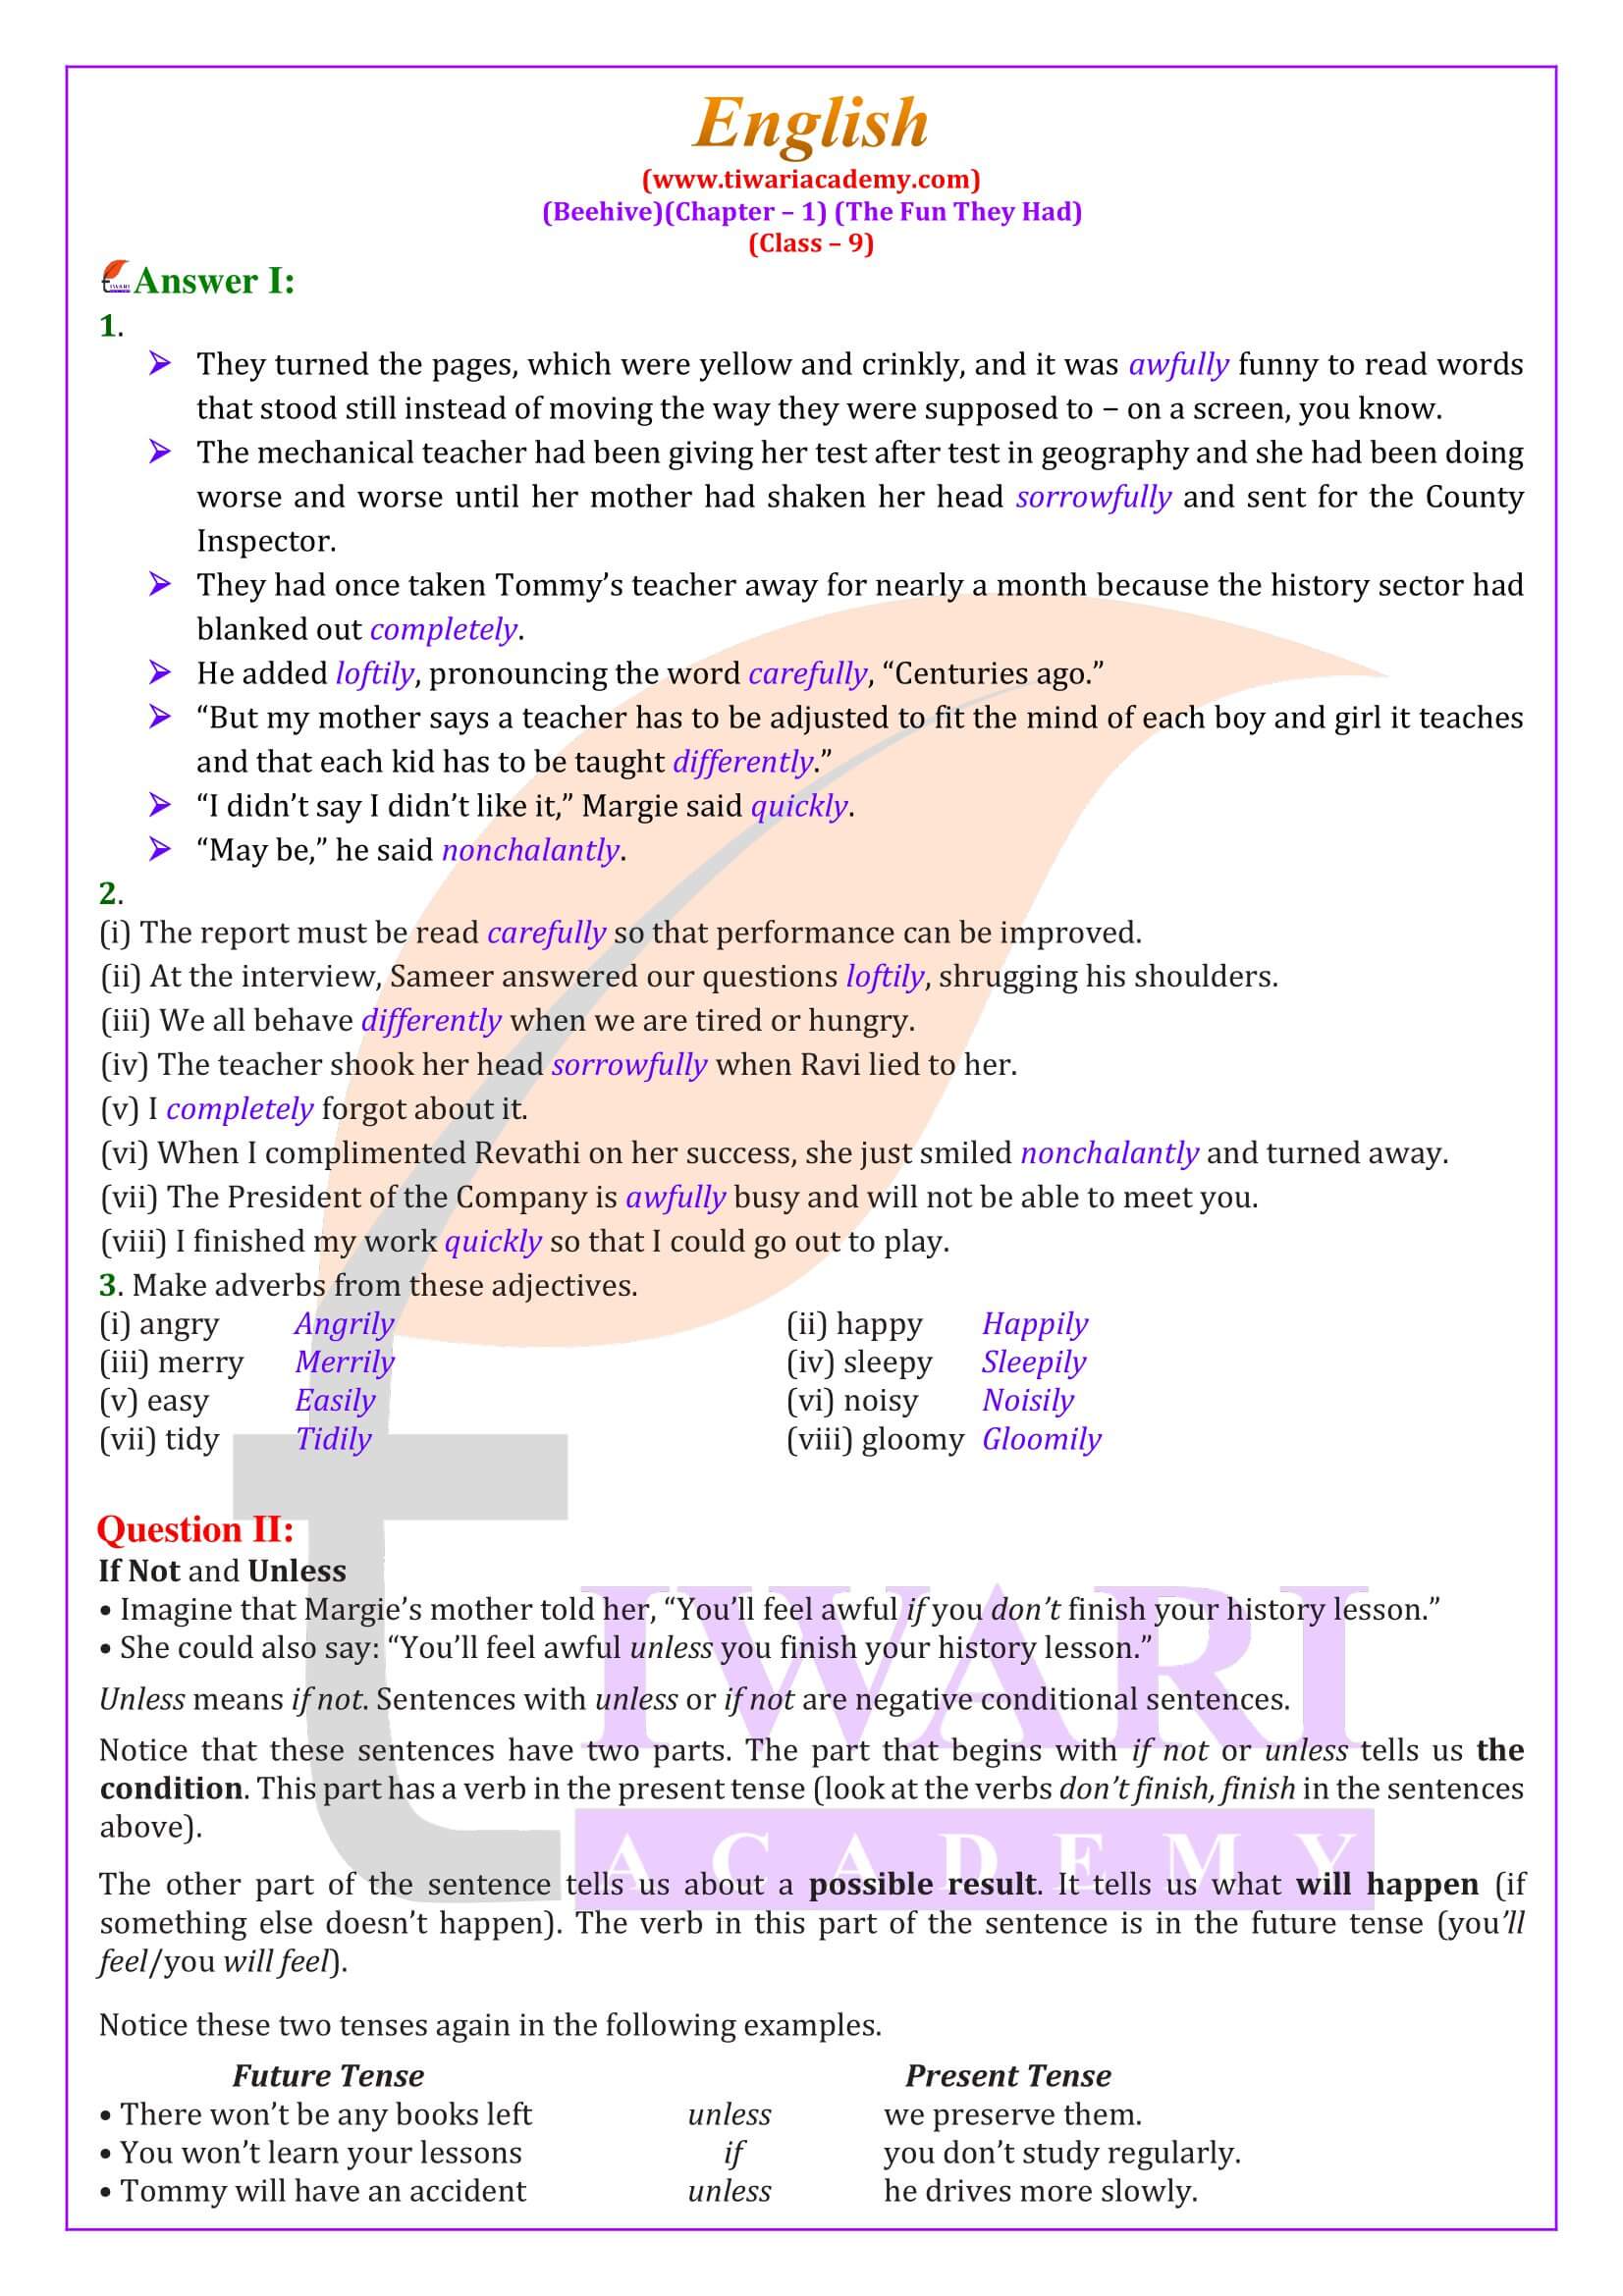 NCERT Solutions Class 9 English Beehive Chapter 1